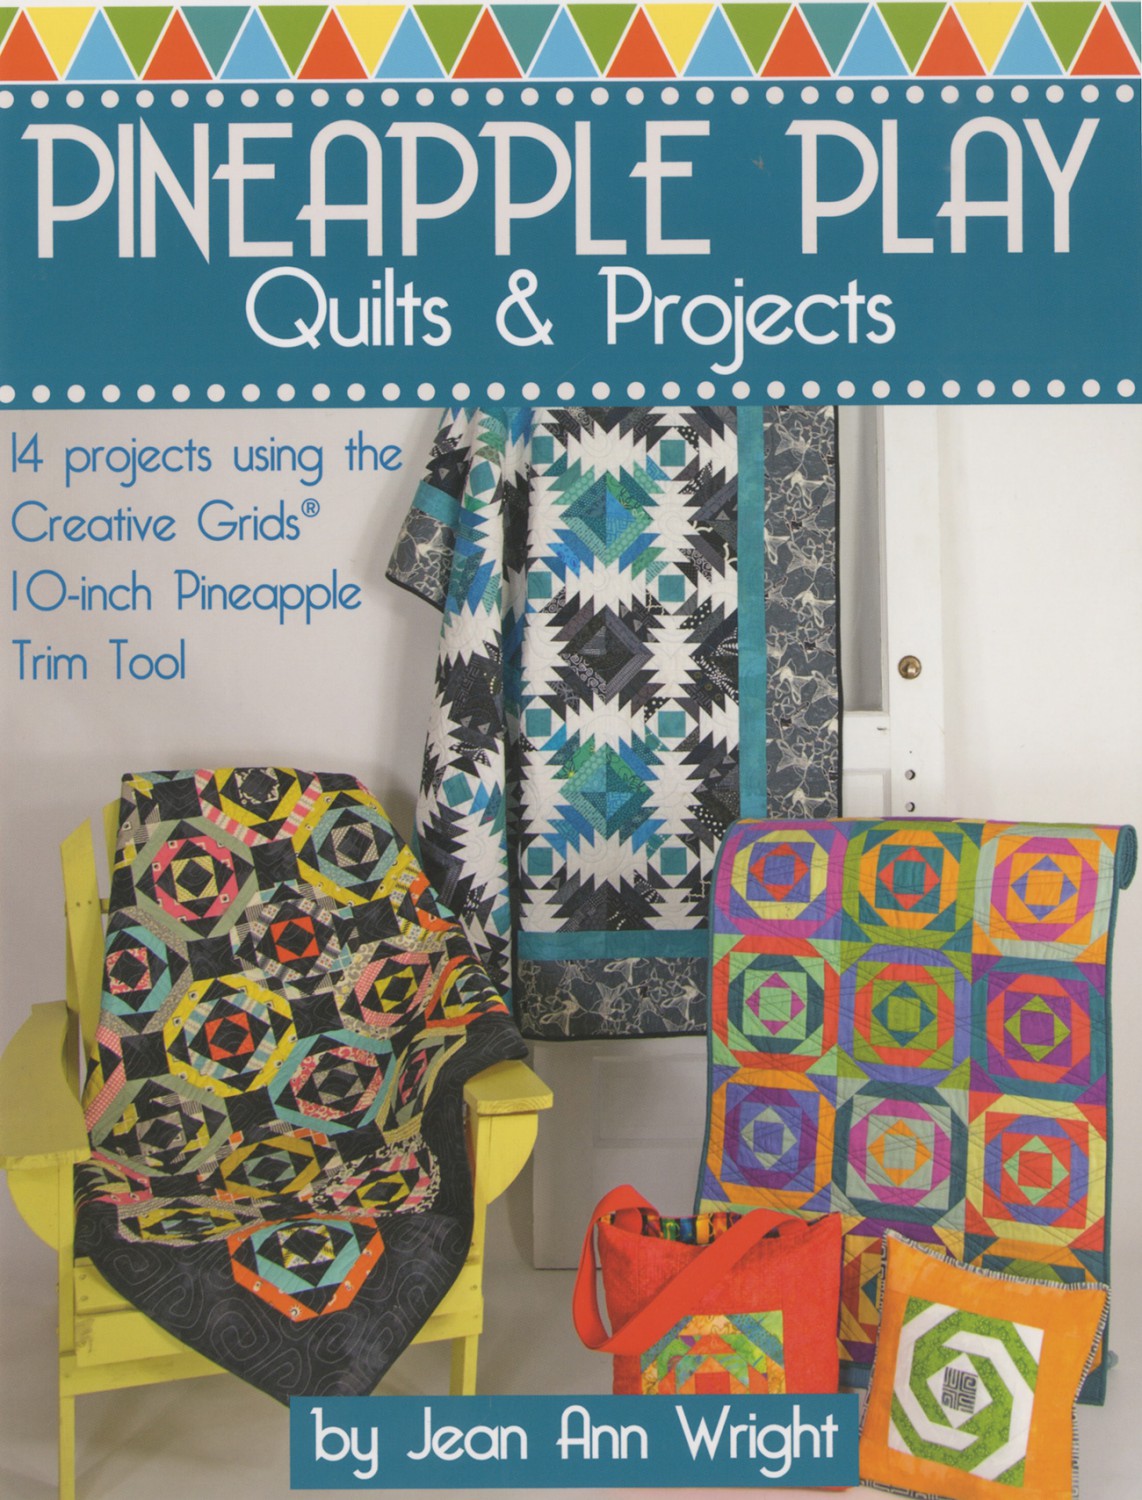 Pineapple Play Quilts and Projects by Jean Ann Wright